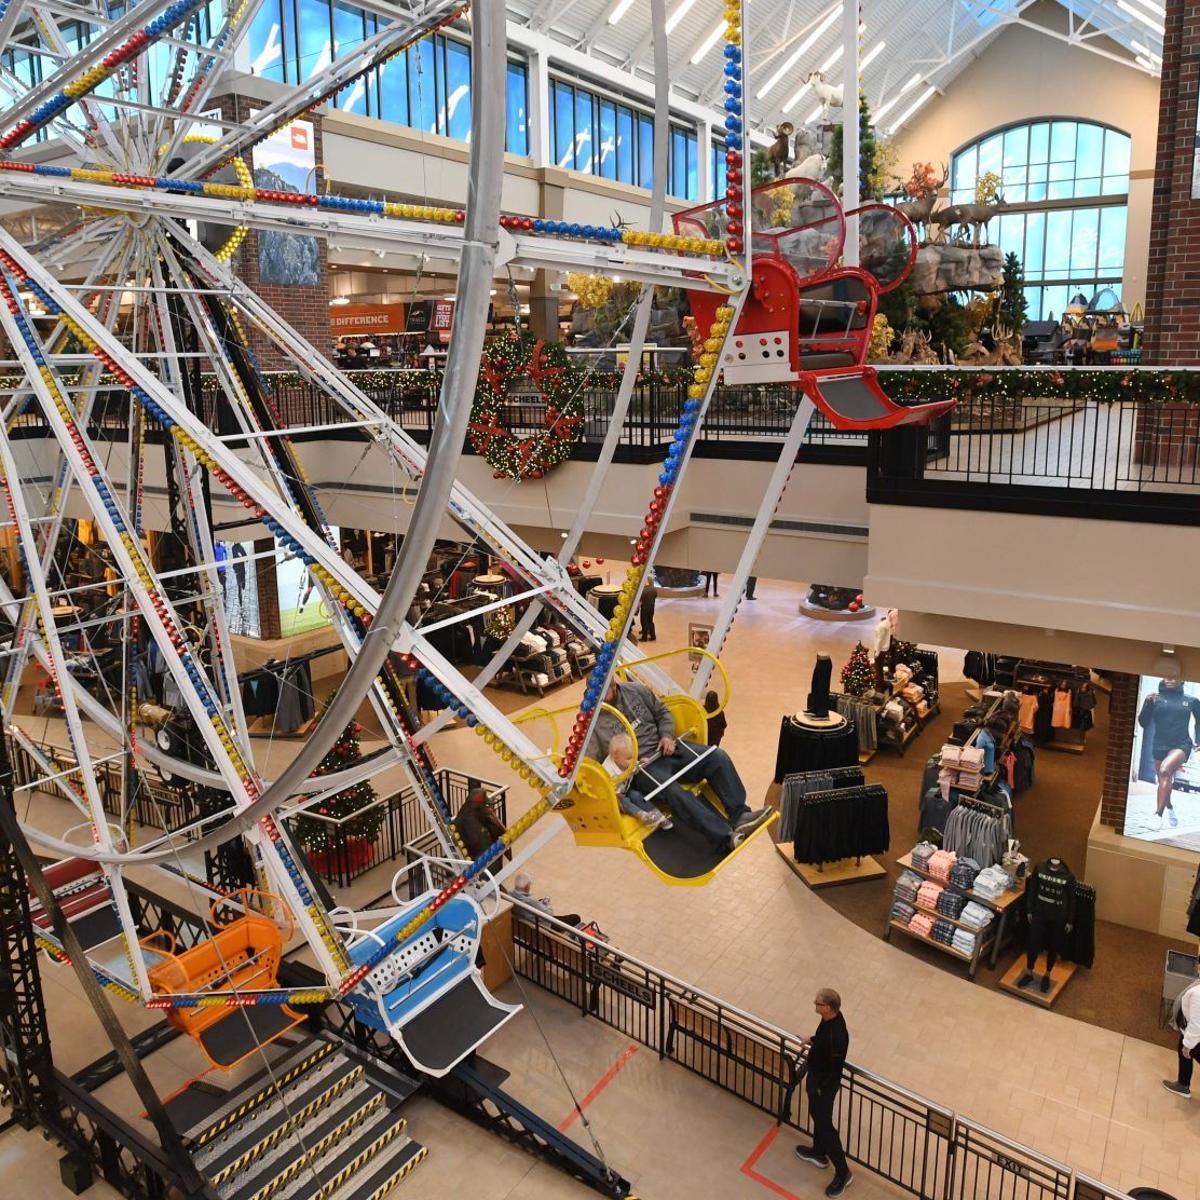 Scheels gains final approval for $16.2 million tax incentive to set up shop  in Colorado Springs, News